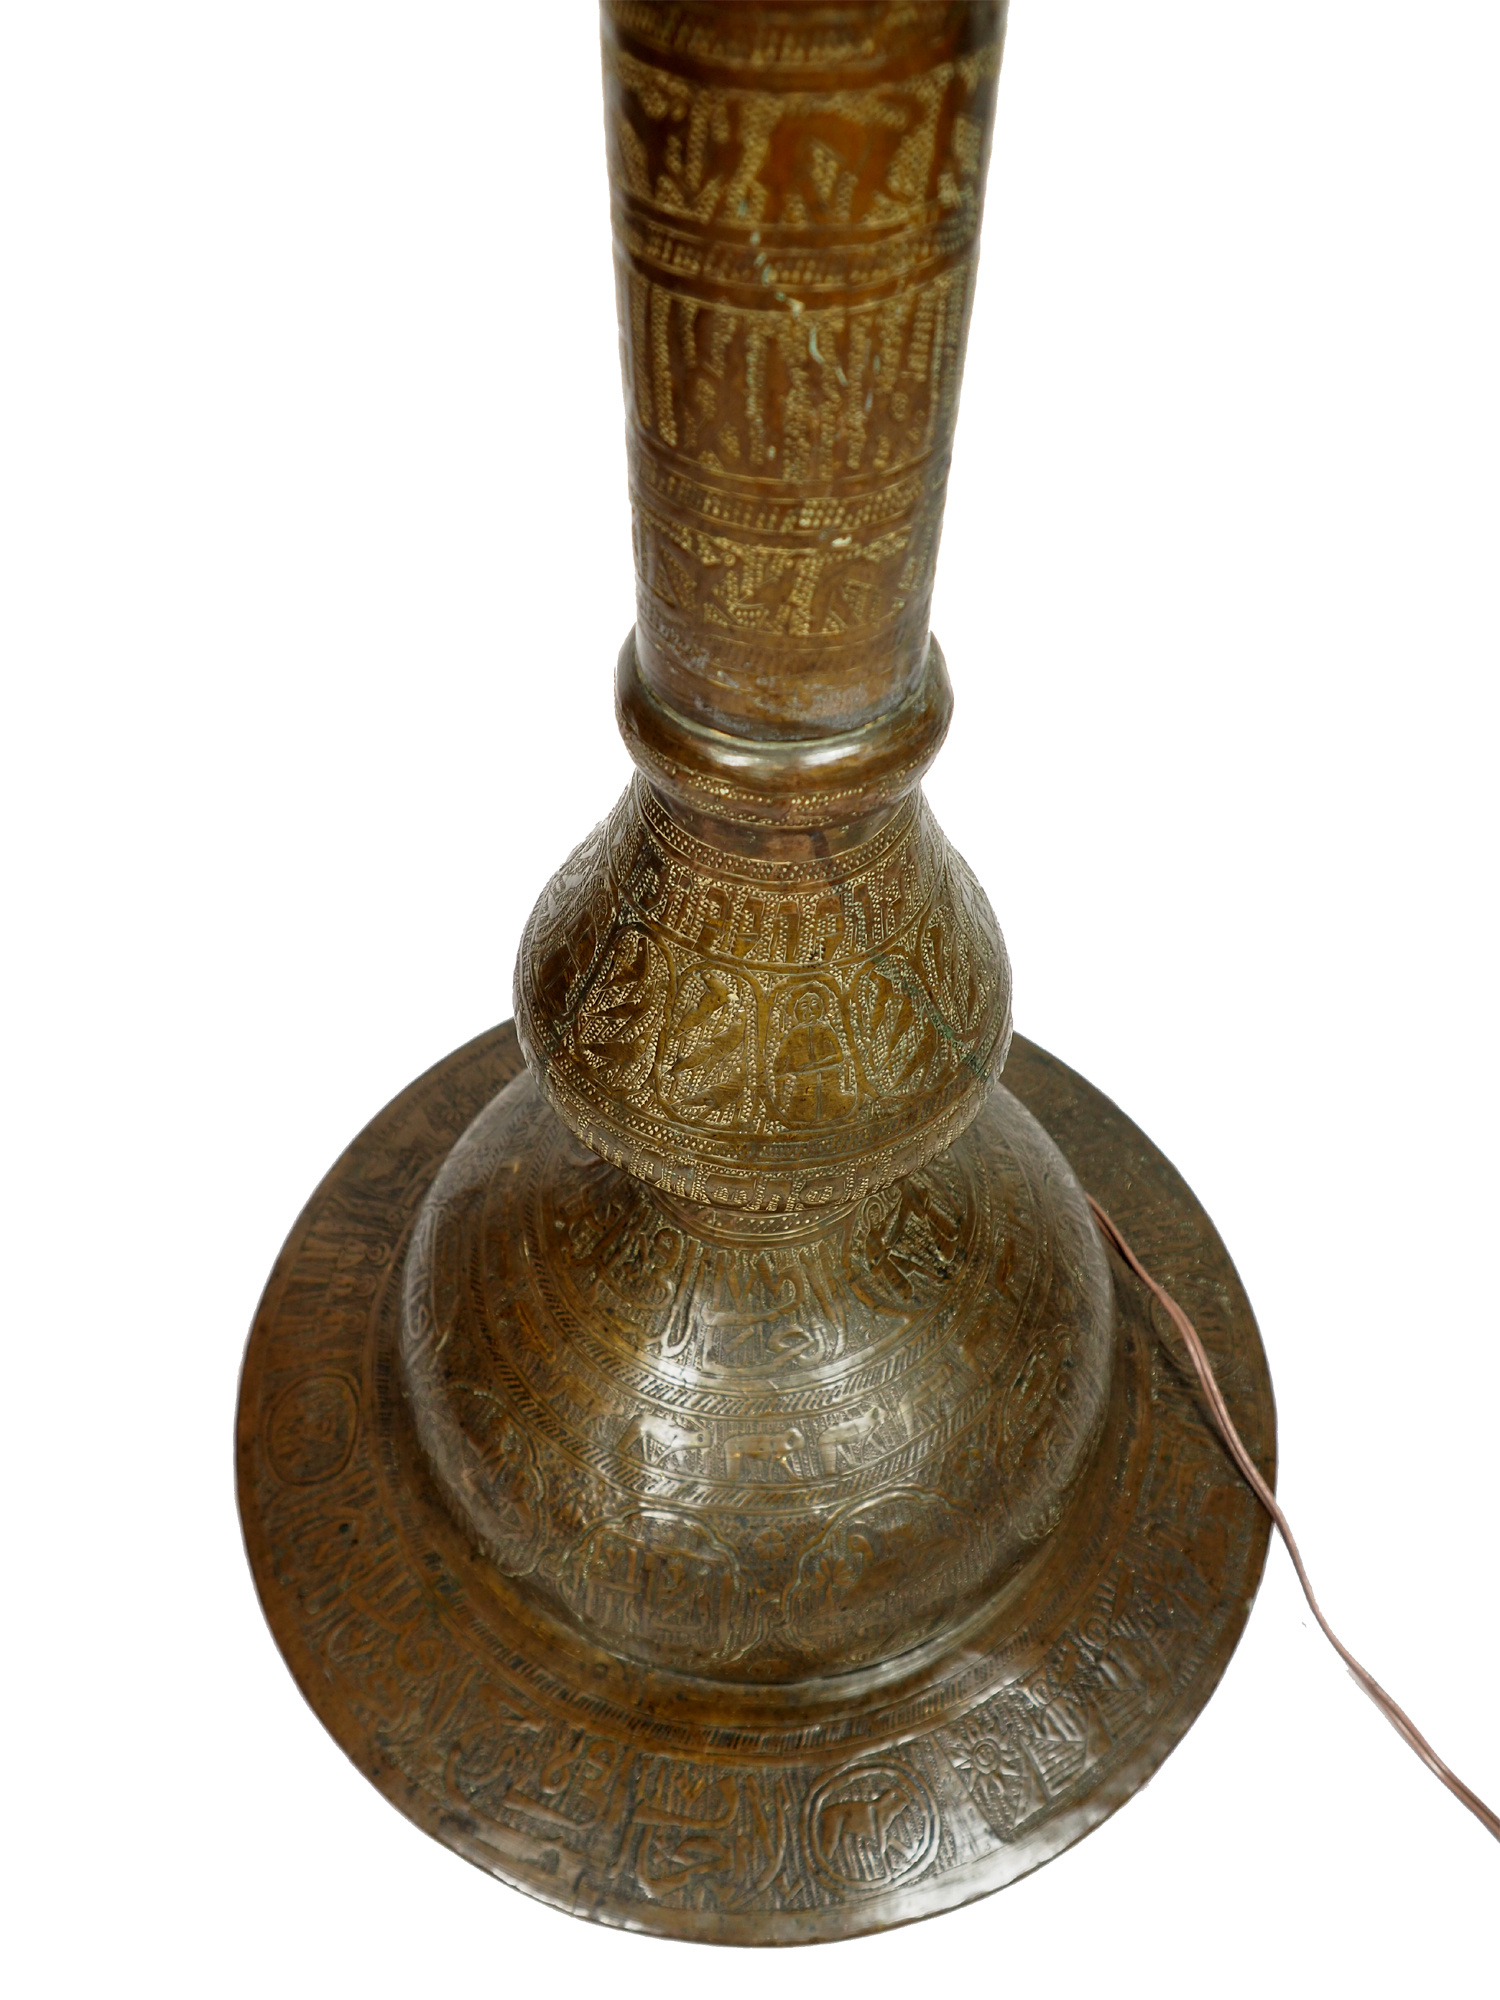 Antique Islamic oriental brass floor lamp standard lamp from the 19th c. Egyptian Middle Eastern Hand Painted Camel Skin leather lampshade